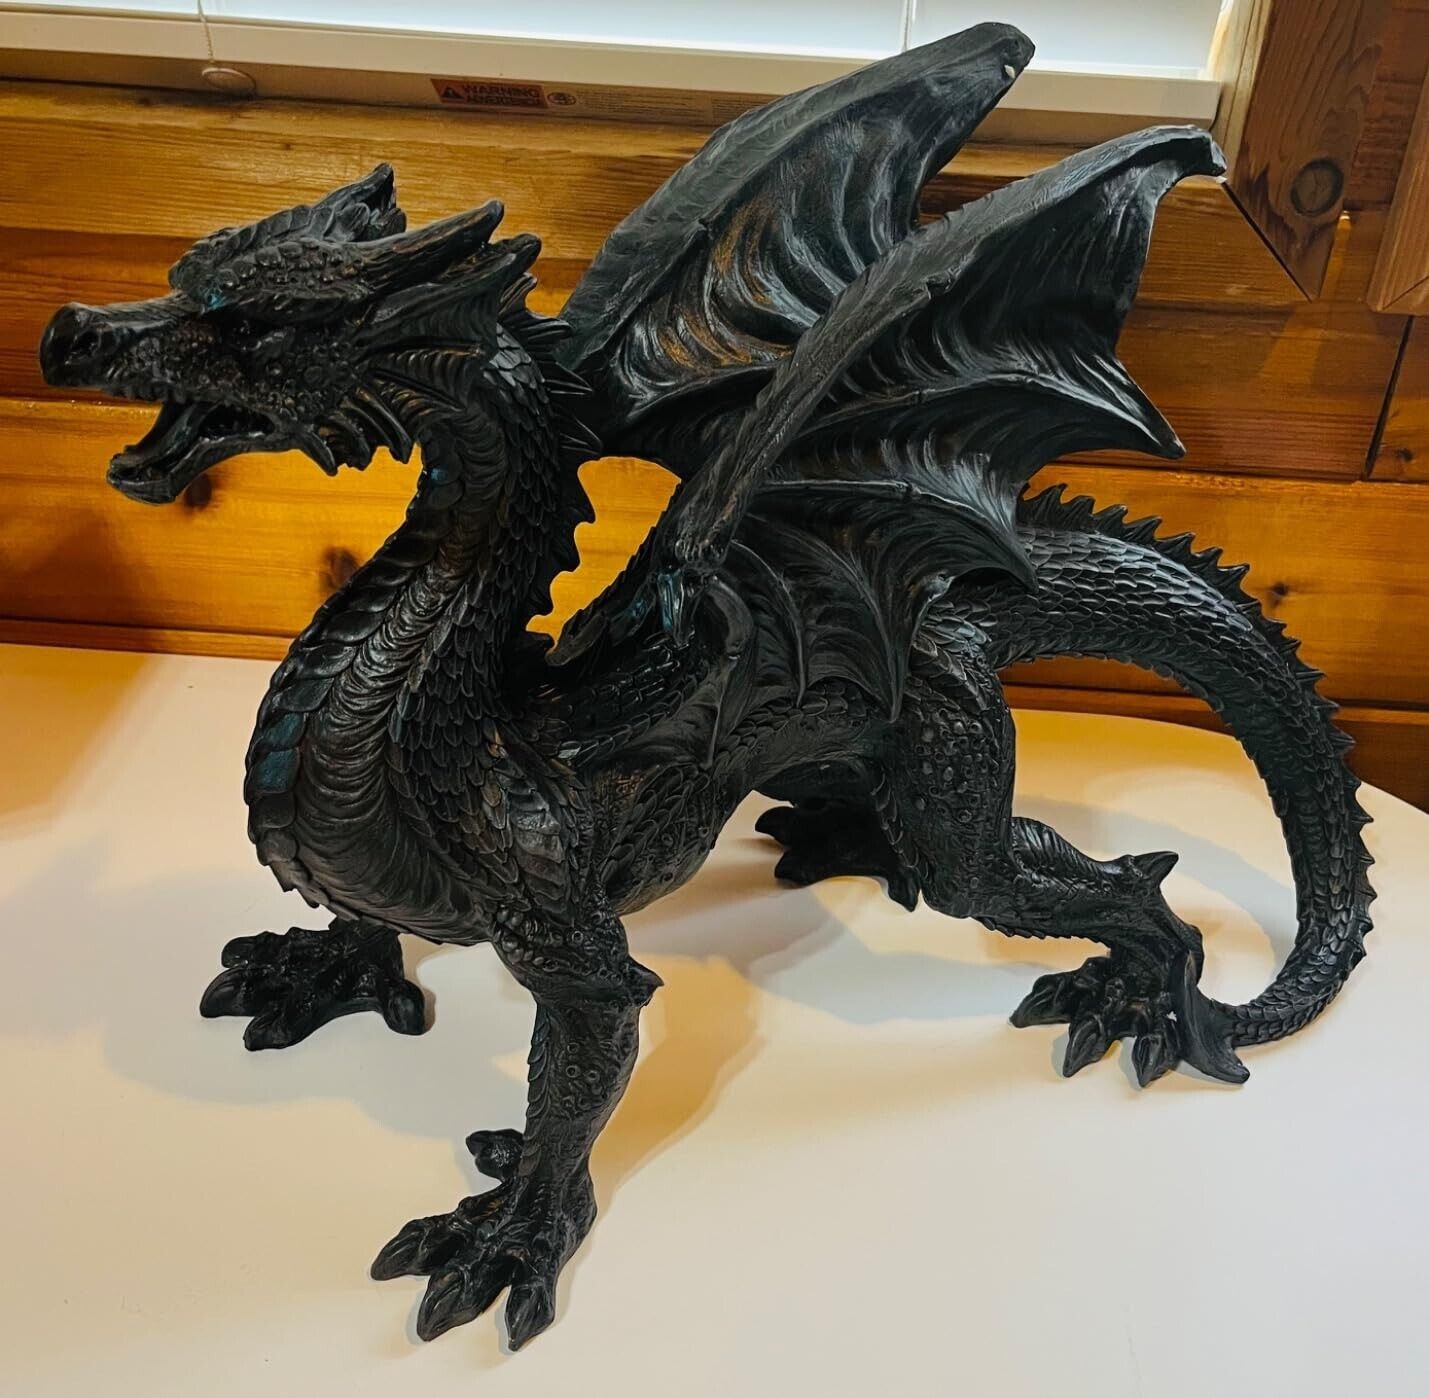 Huge Winged Dragon Gothic Medieval Mythic Guardian Roaring Resin Sculpture 19 In